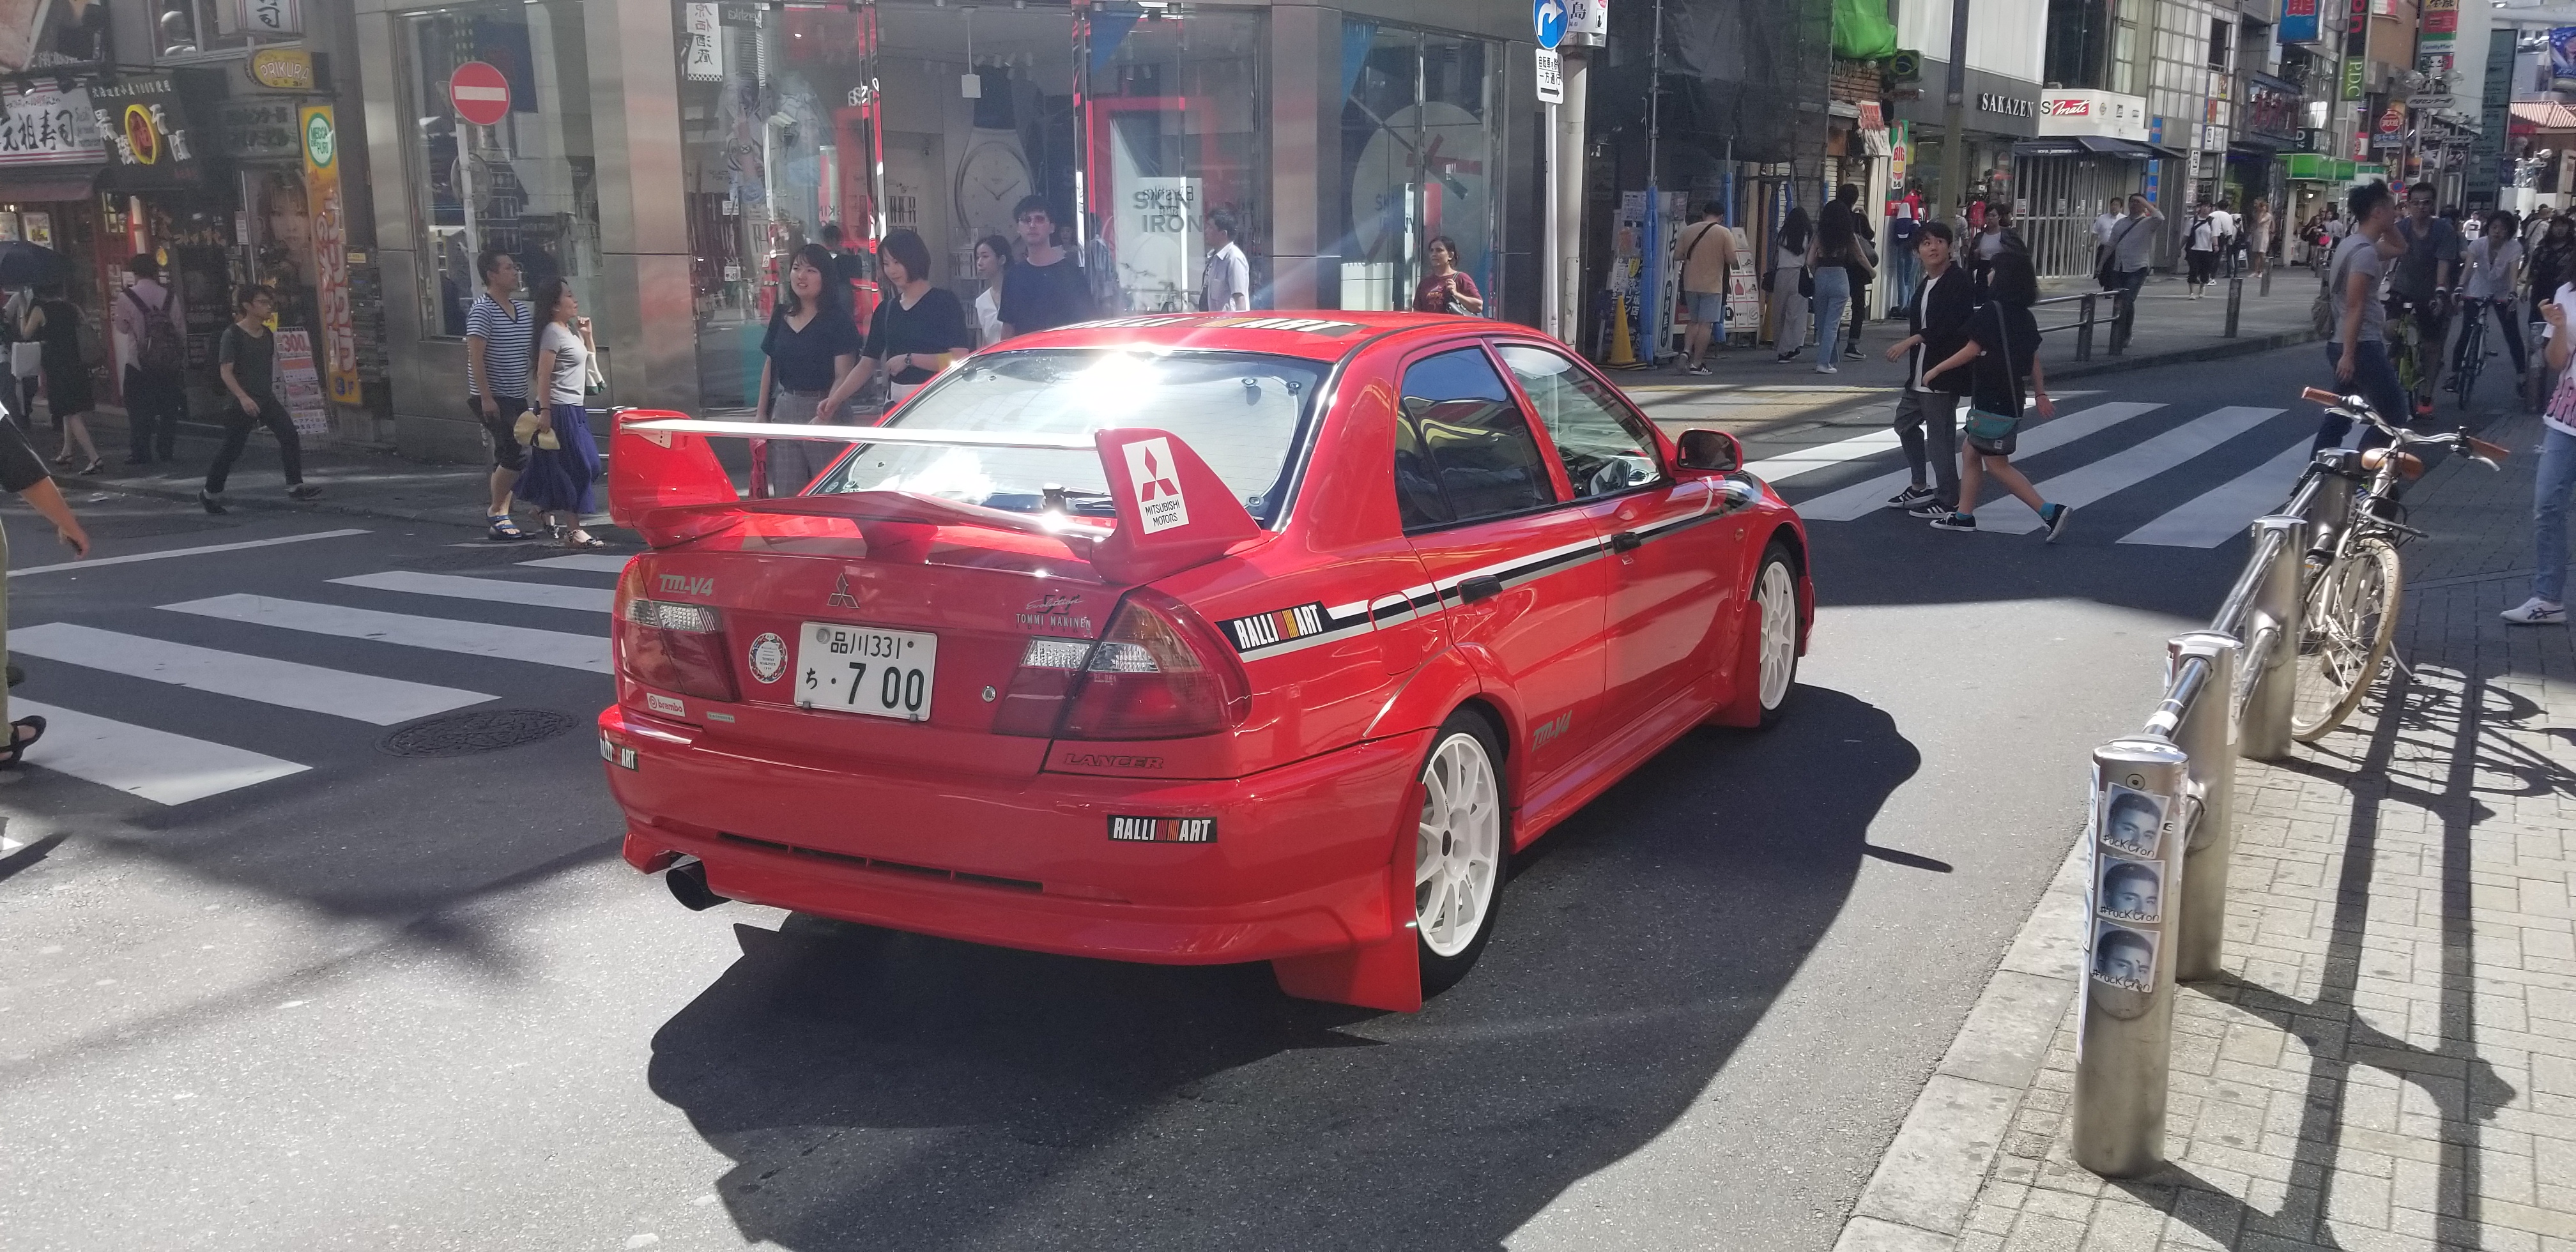 best of Camera foot opel manta candid scale